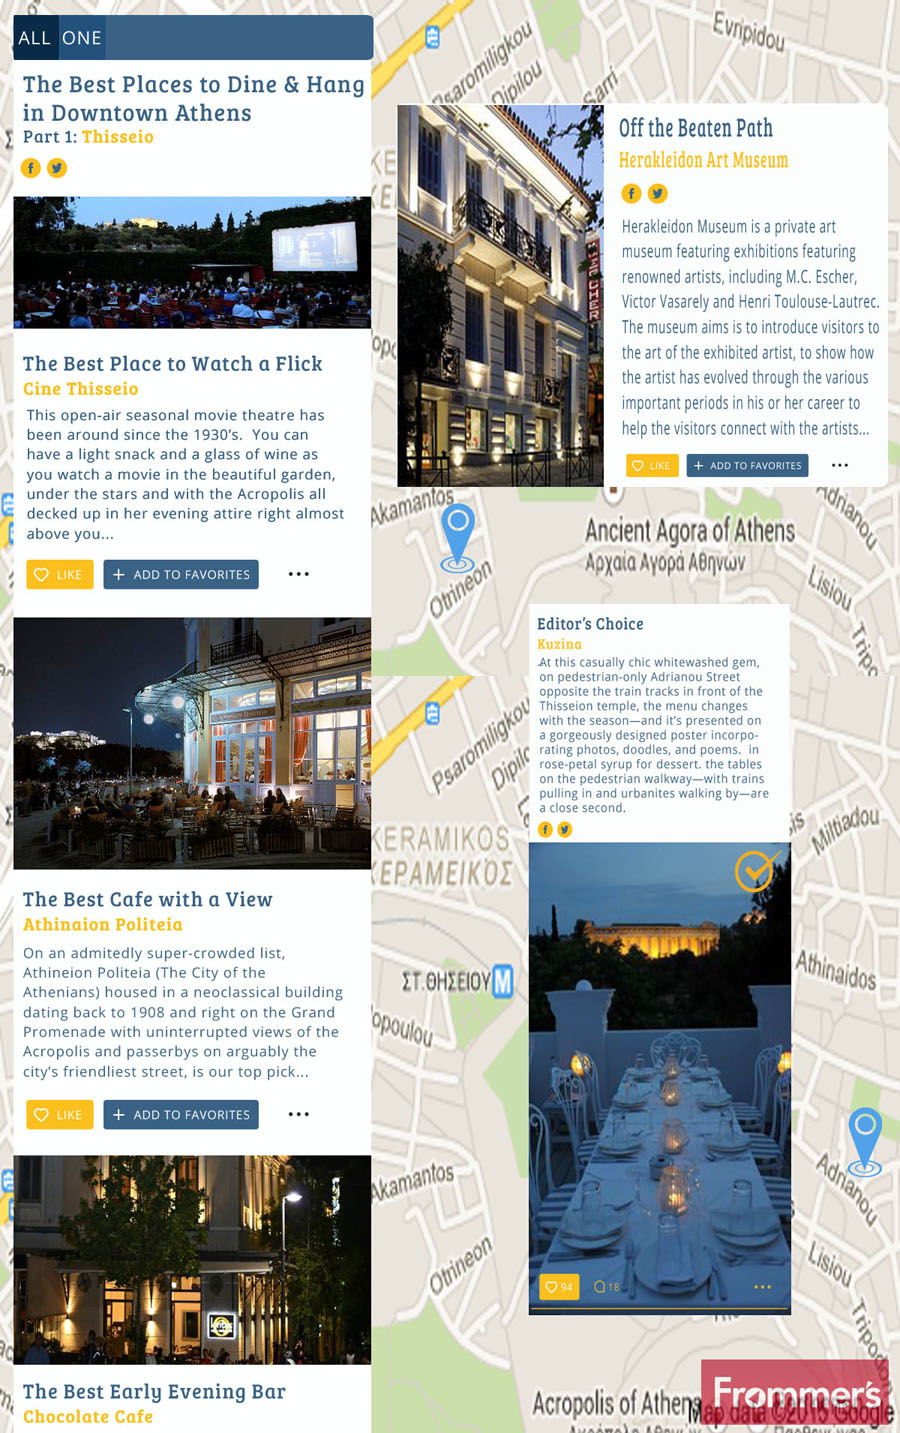 sample from the site/app featuring some of the coolest spots in downtown Athens with images, reviews and ratings